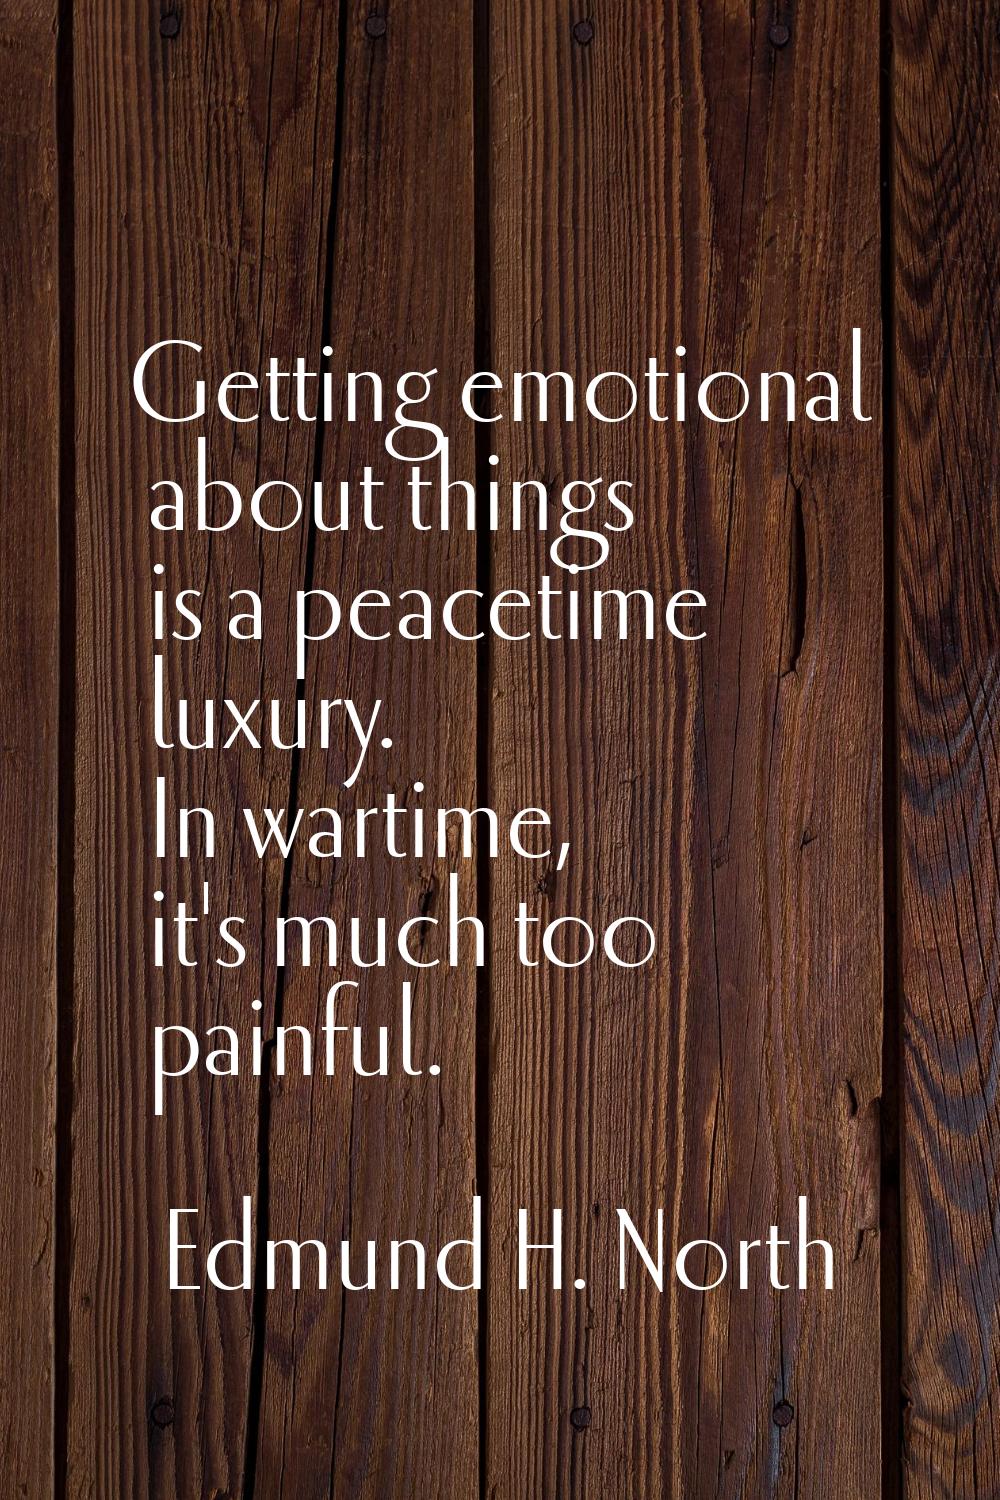 Getting emotional about things is a peacetime luxury. In wartime, it's much too painful.